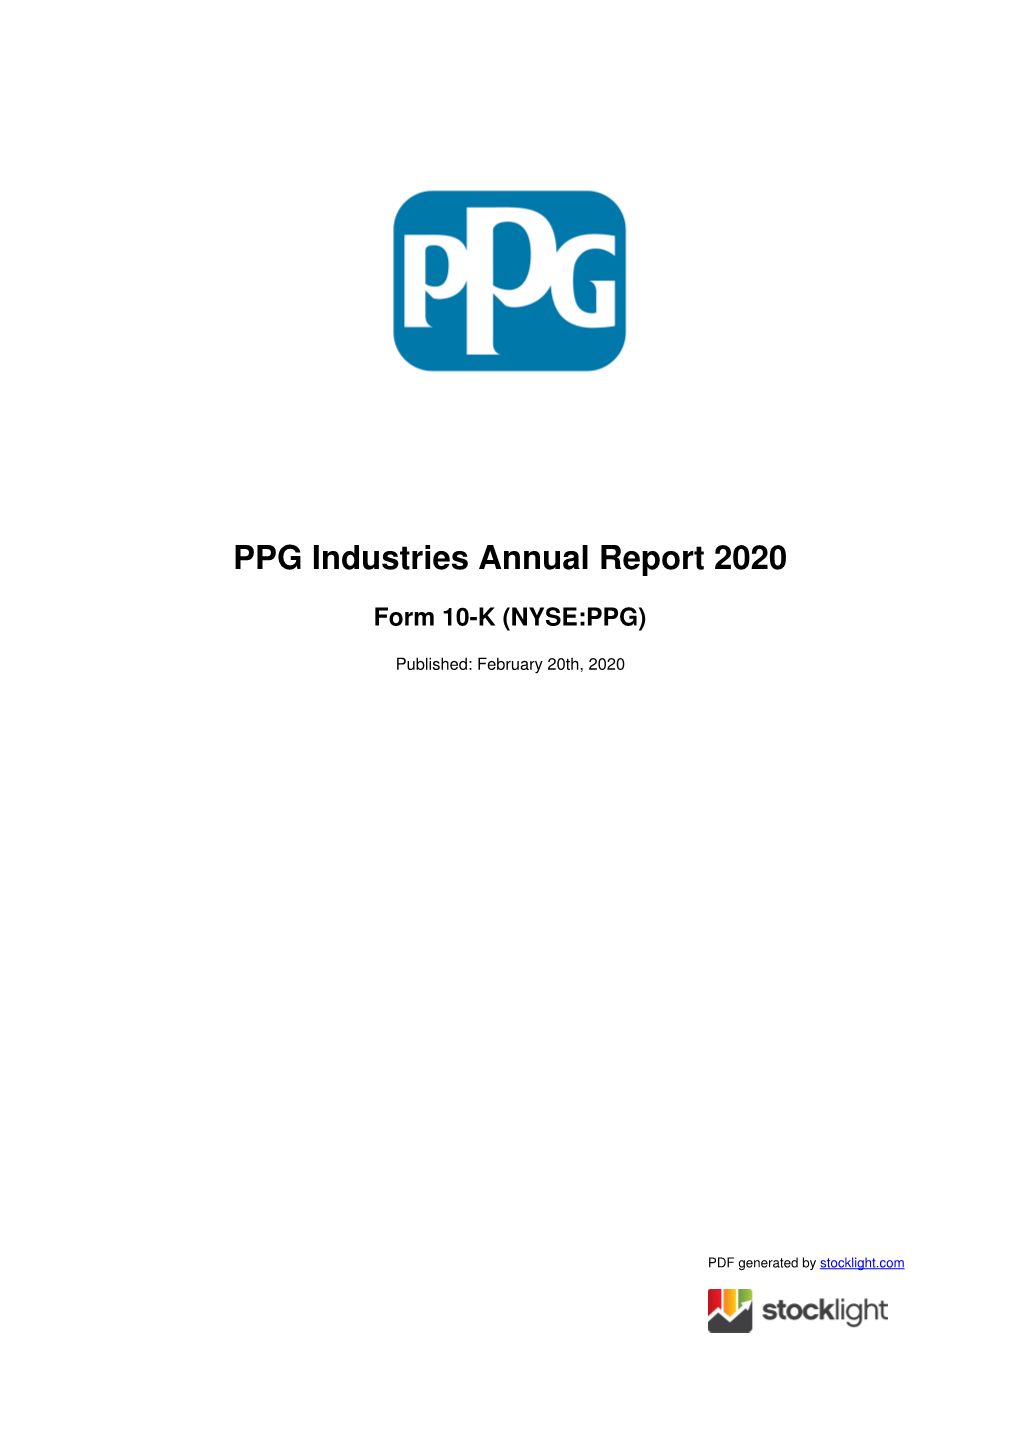 PPG Industries Annual Report 2020